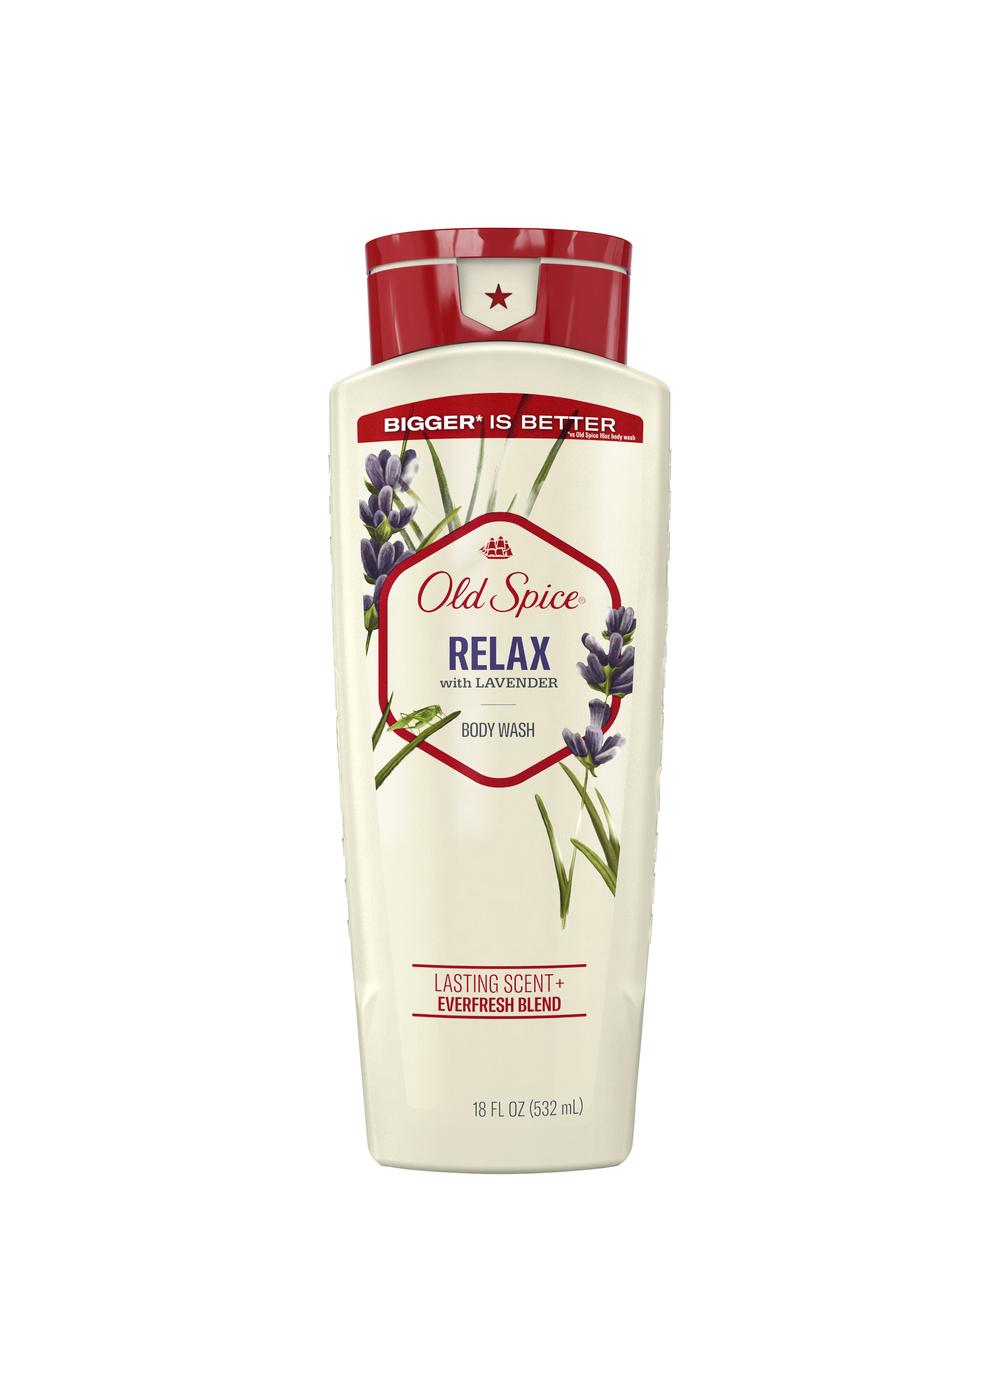 Old Spice Body Wash - Relax with Lavender; image 1 of 2